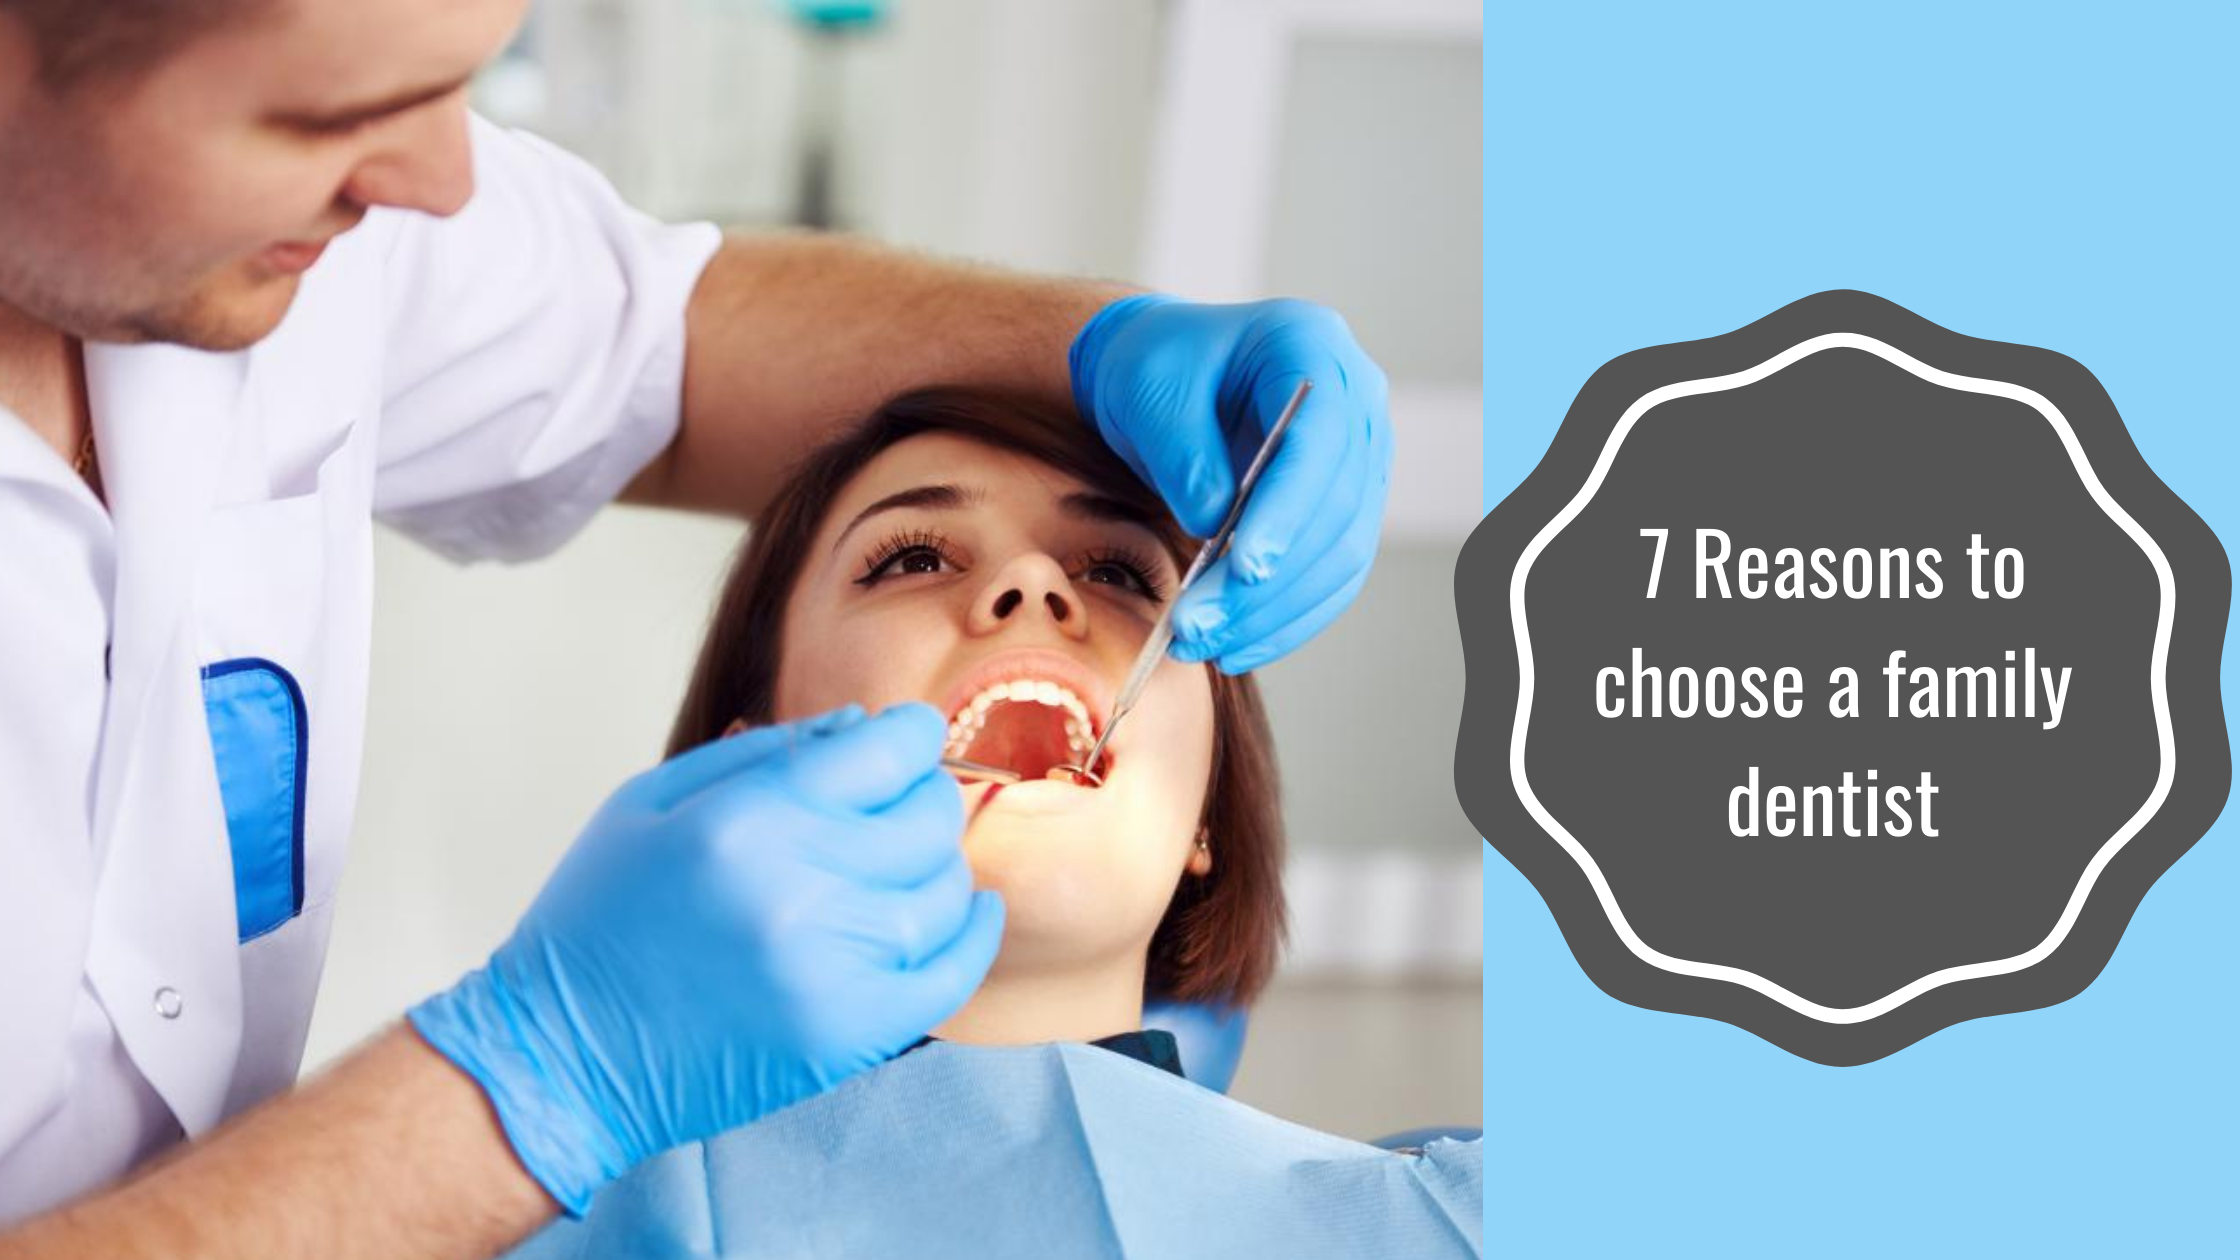 7 reasons to choose a family dentist 1